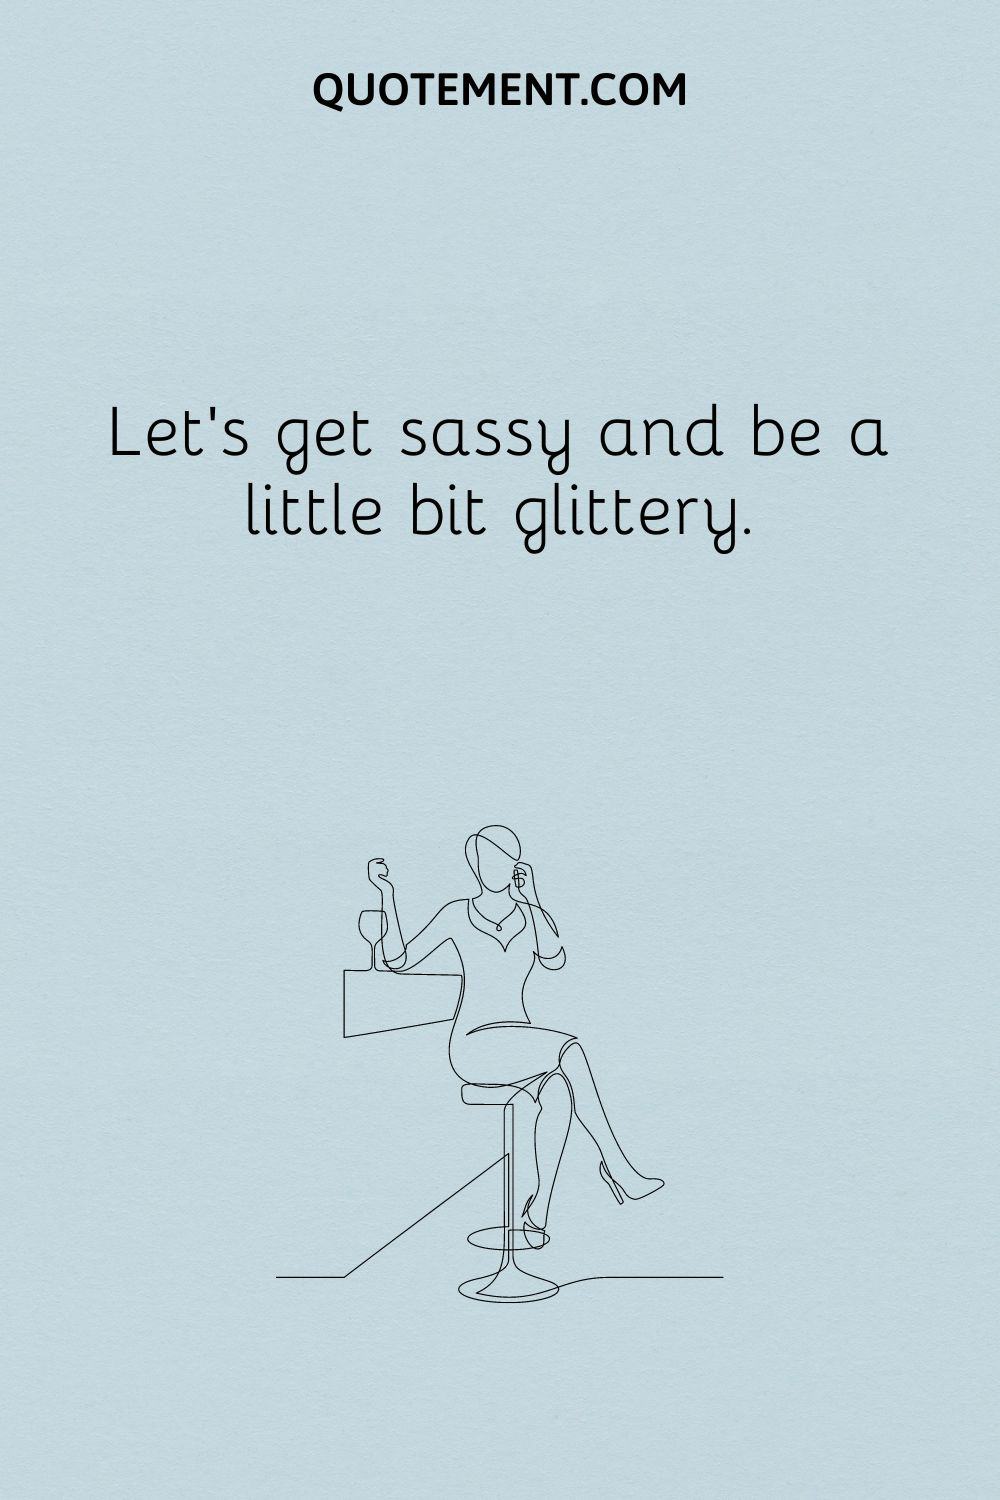 Let’s get sassy and be a little bit glittery.